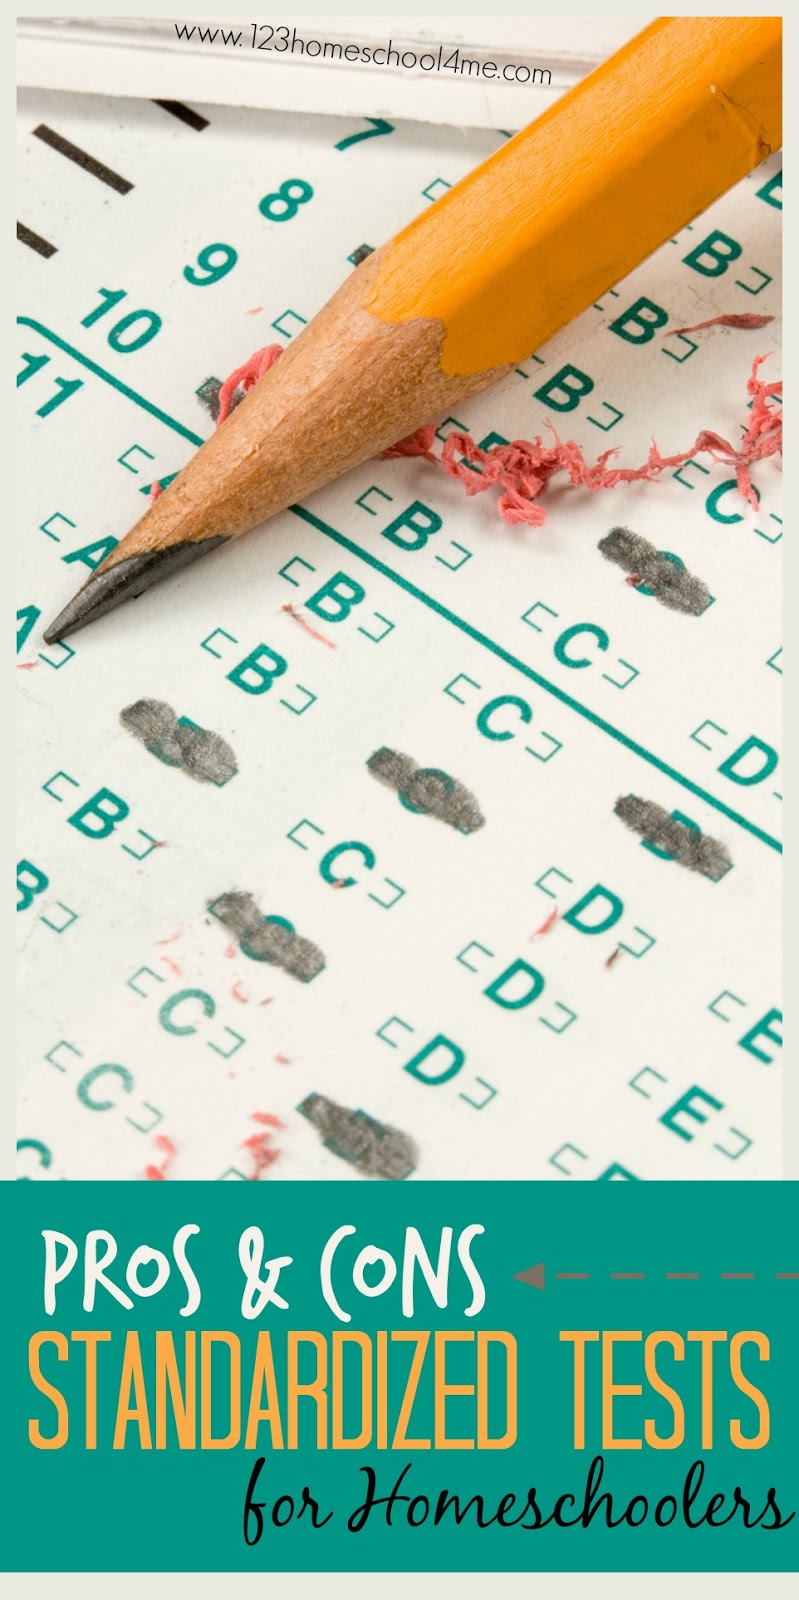 pros-and-cons-of-standardized-tests-for-homeschoolers